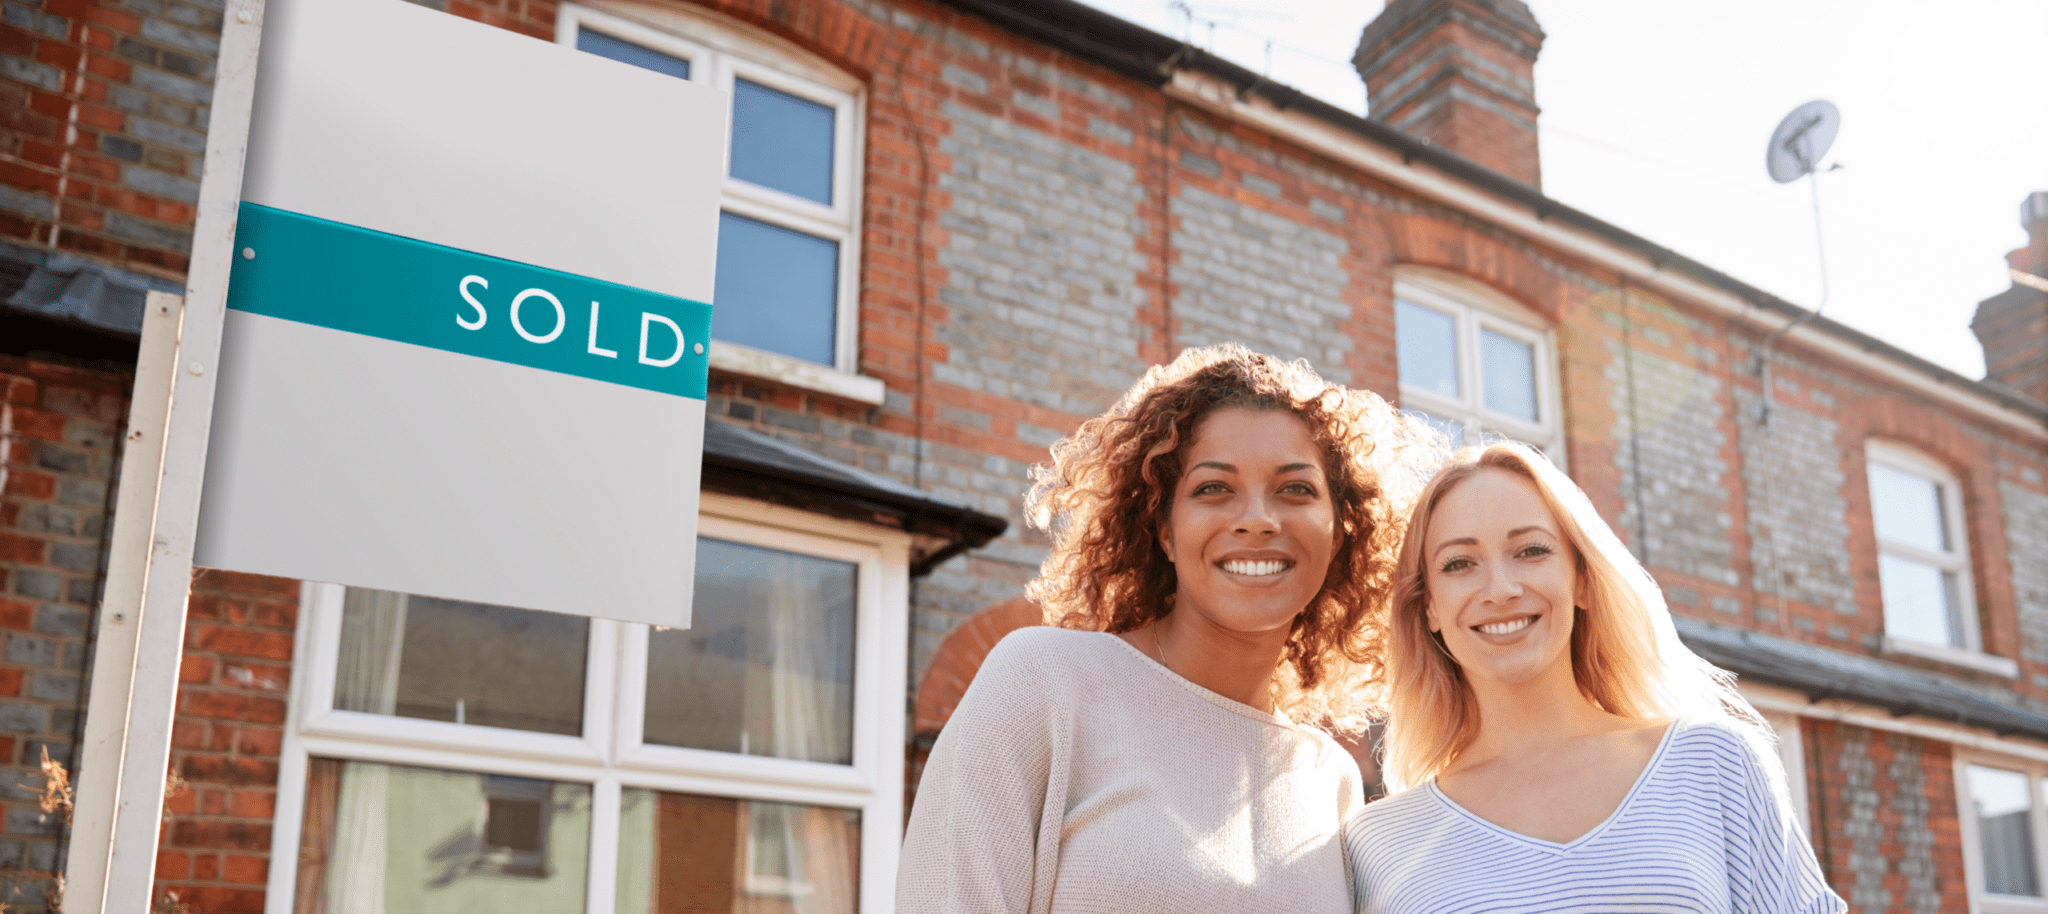 young women outside a house with sold sign